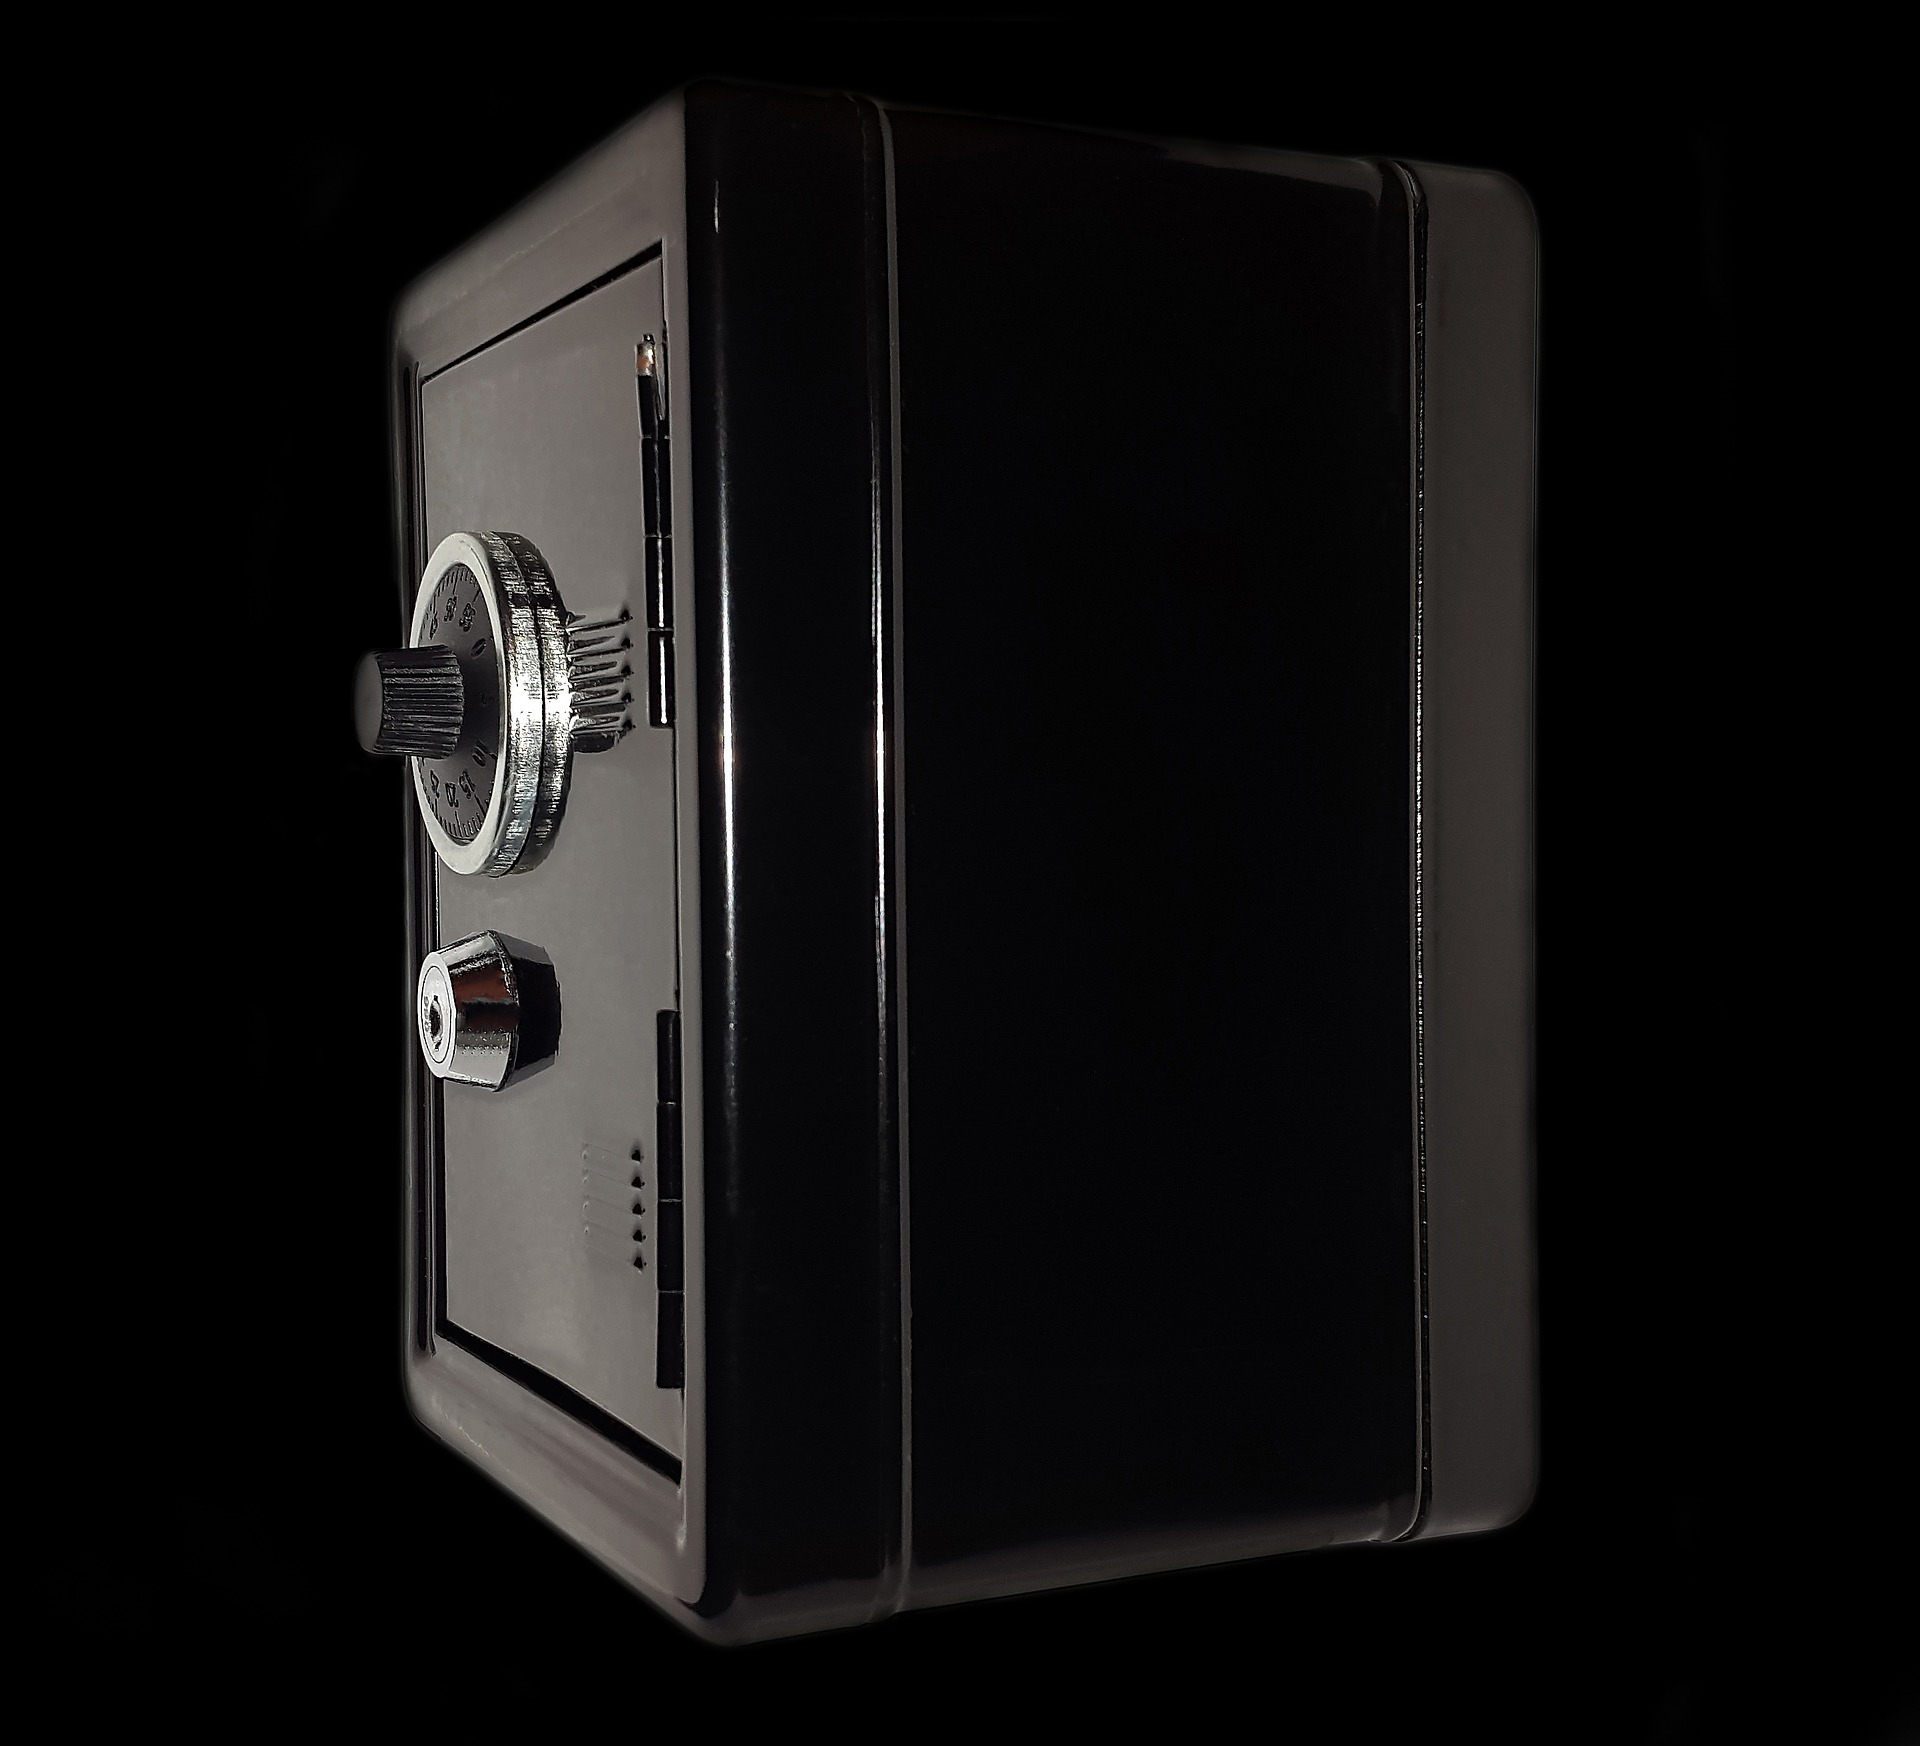 A dark colored combination lock safe perfect for storing jewelry.